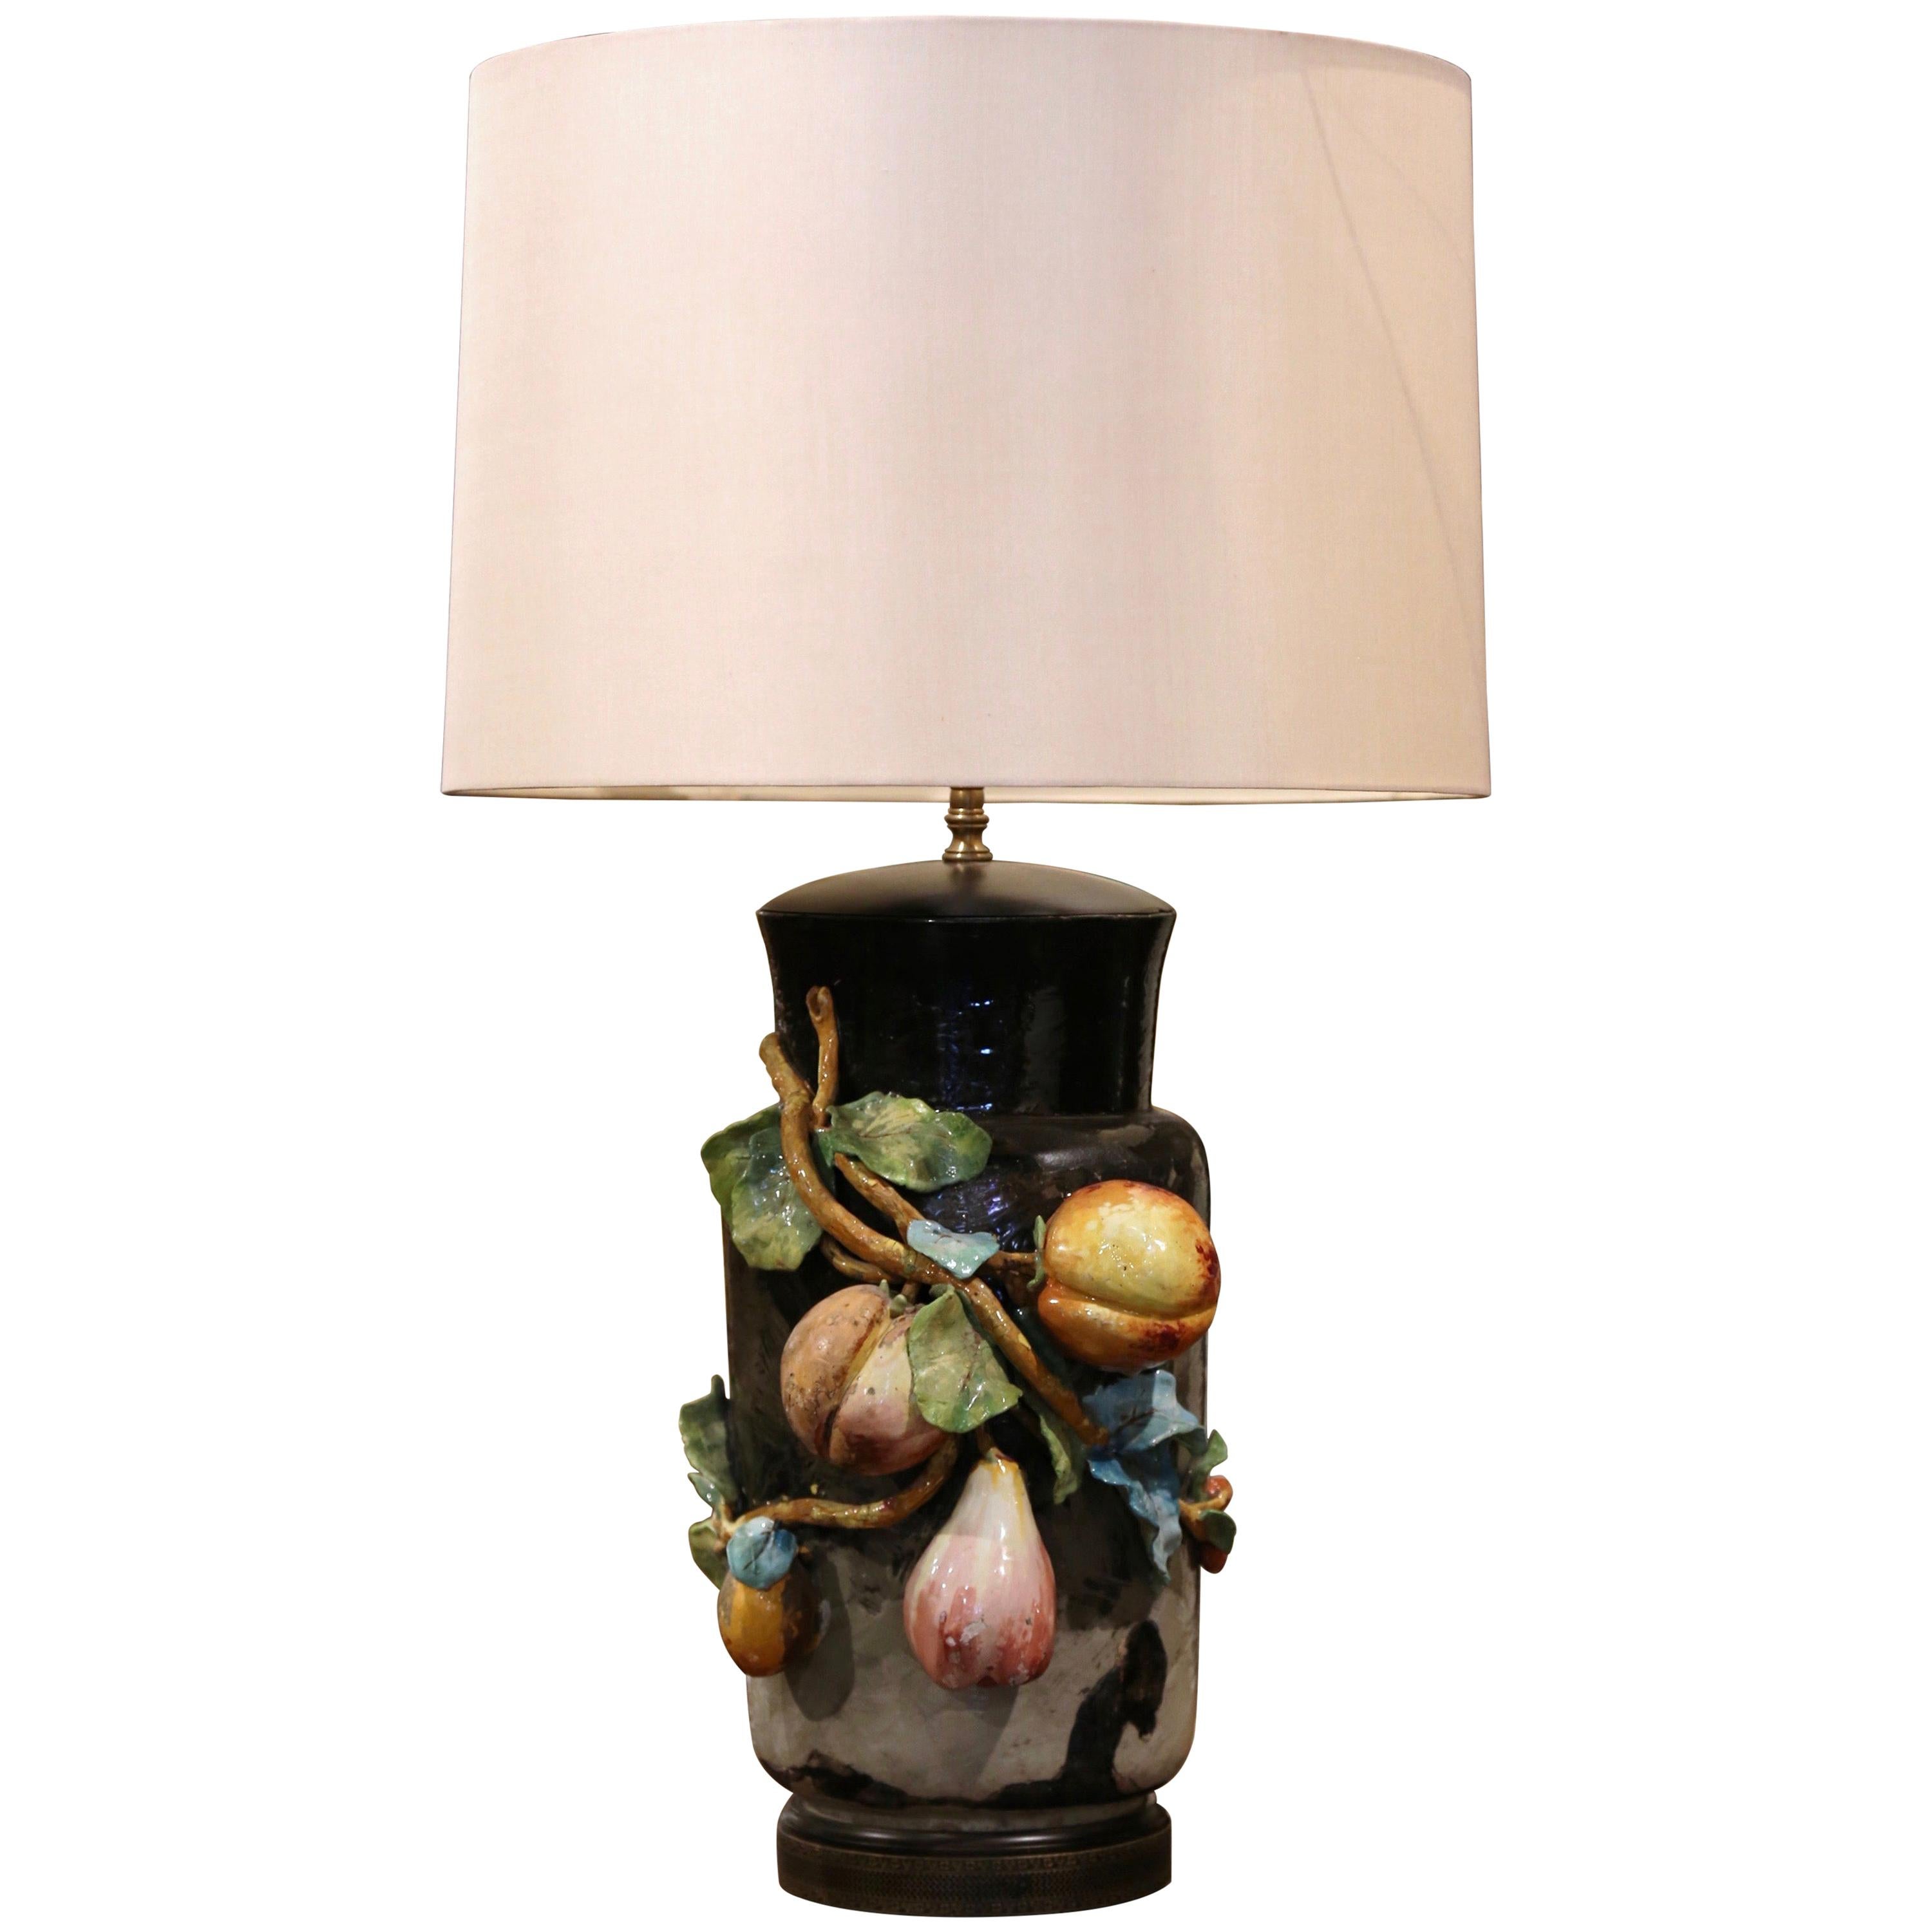 19th Century French Painted Ceramic Barbotine Table Lamp from Montigny-sur-Loing